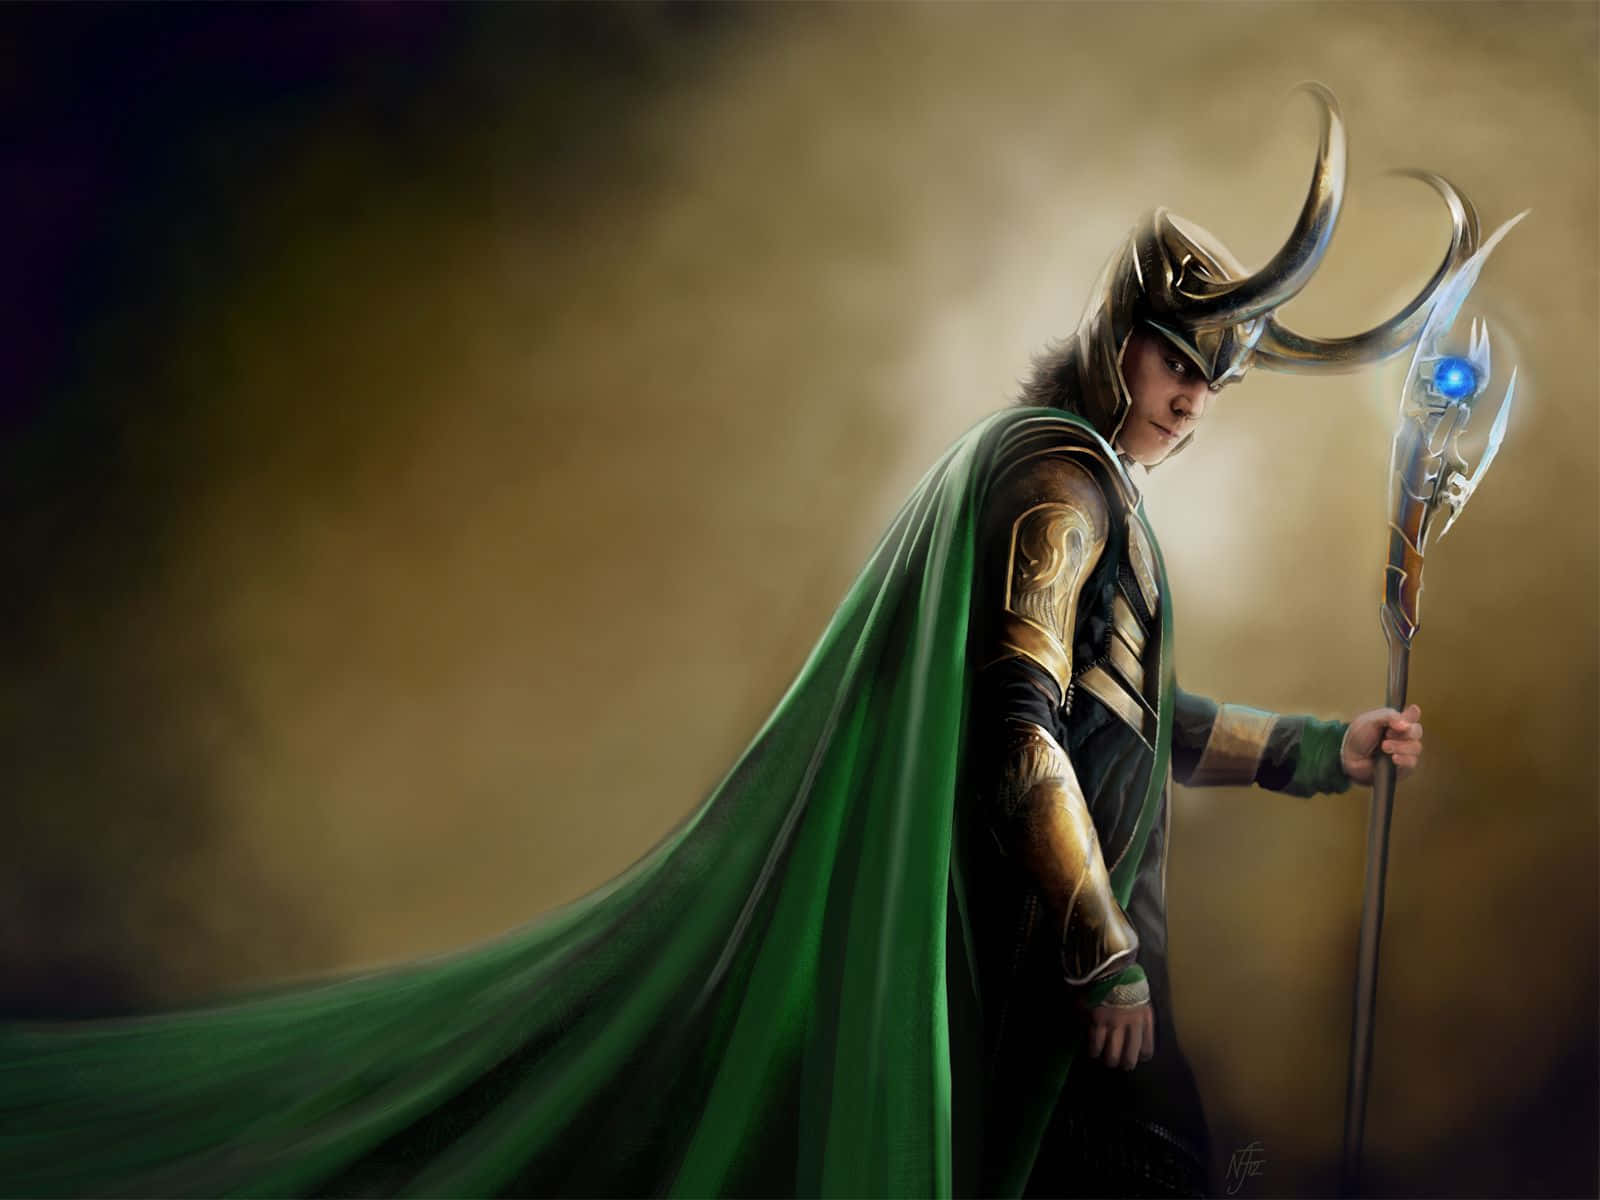 Enigmatic Loki - The Cunning God of Mischief